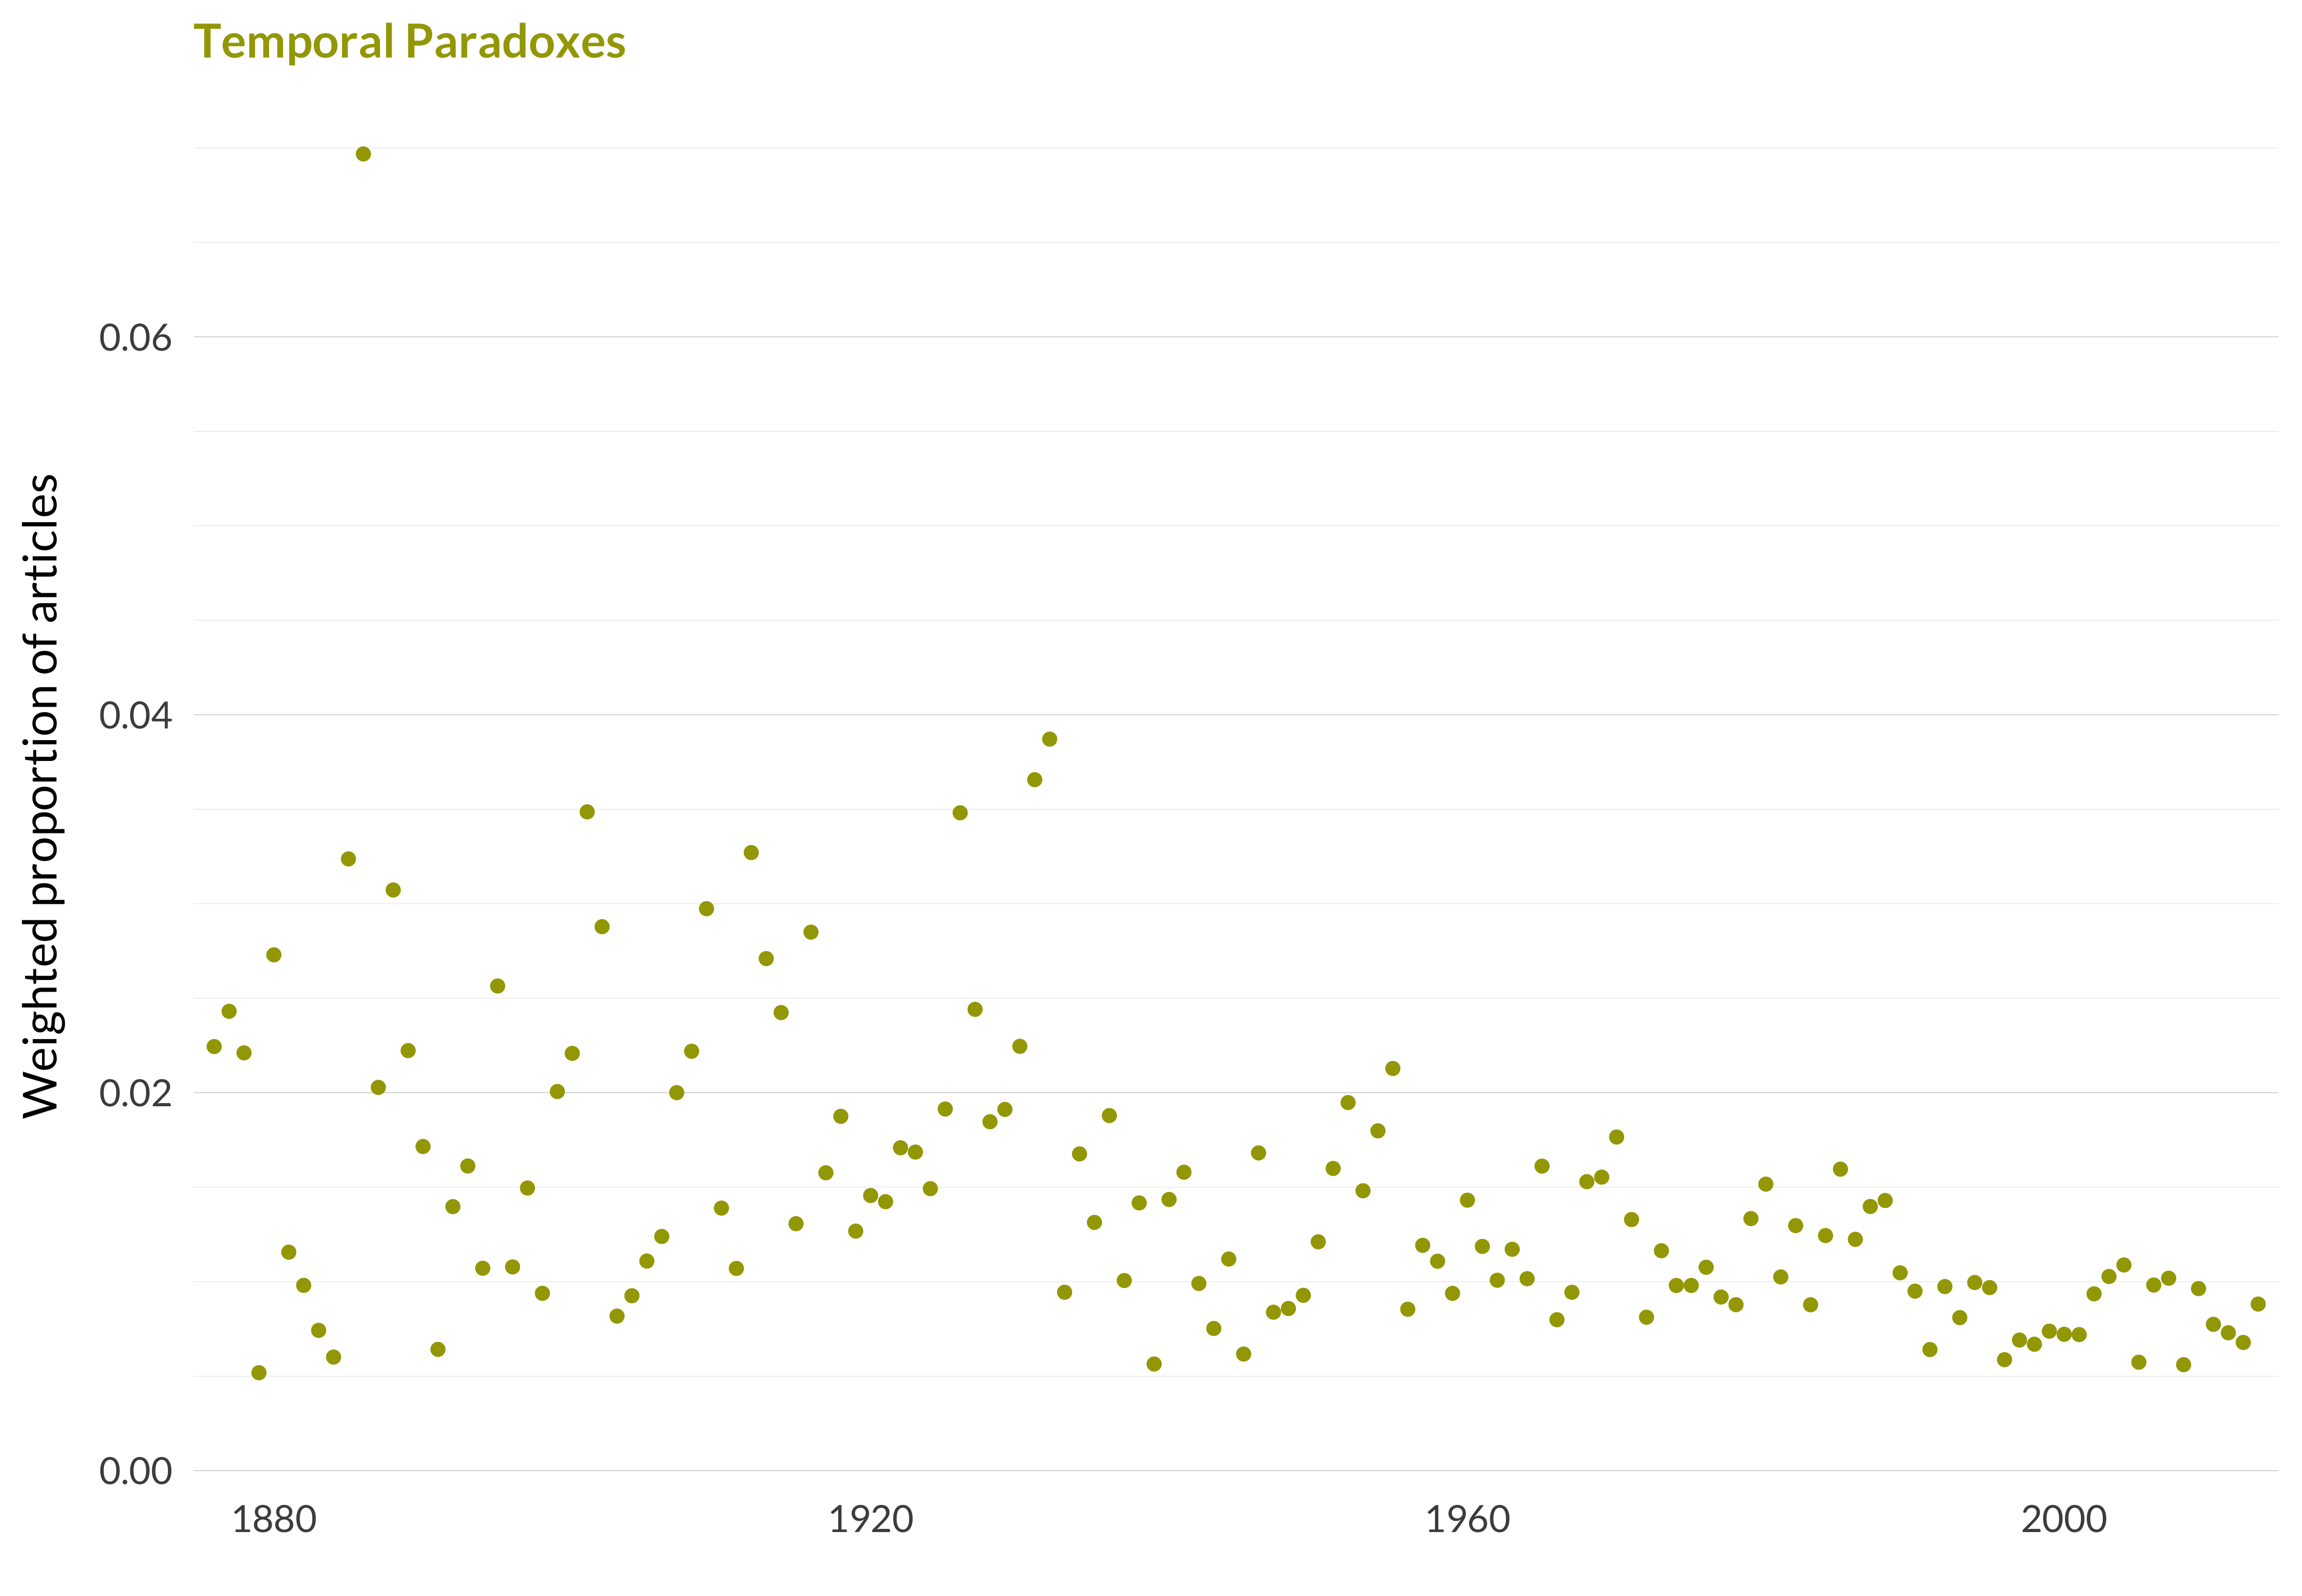 A scatterplot showing which proportion of articles each year are in the temporal paradoxestopic. The x-axis shows the year, the y-axis measures the proportion of articles each year in this topic. There is one dot per year. The highest value is in 1886 when 7.0% of articles were in this topic. The lowest value is in 1879 when 0.5% of articles were in this topic. The full table that provides the data for this graph is available in Table A.19 in Appendix A.